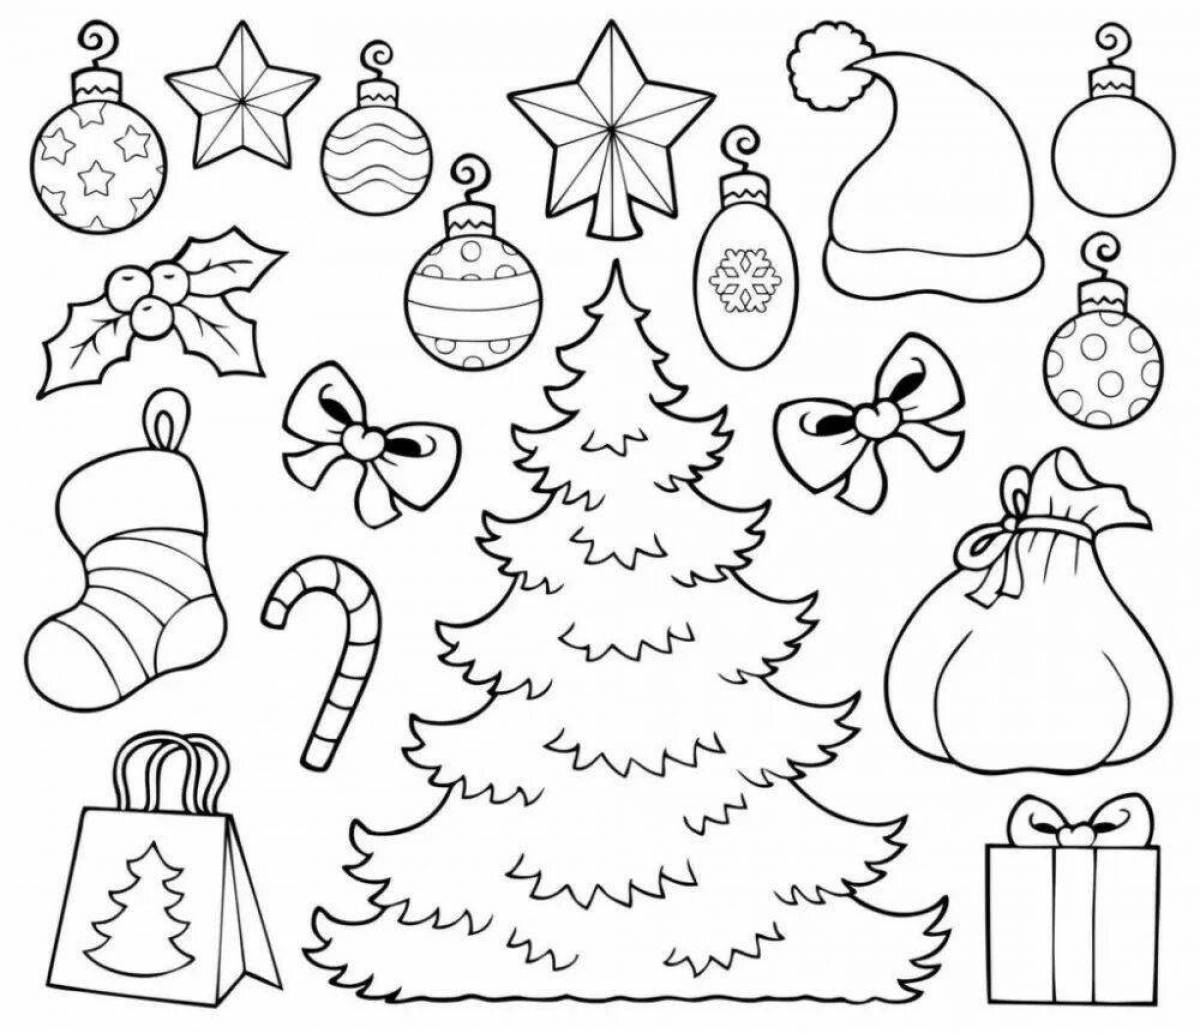 Spicy Christmas coloring book